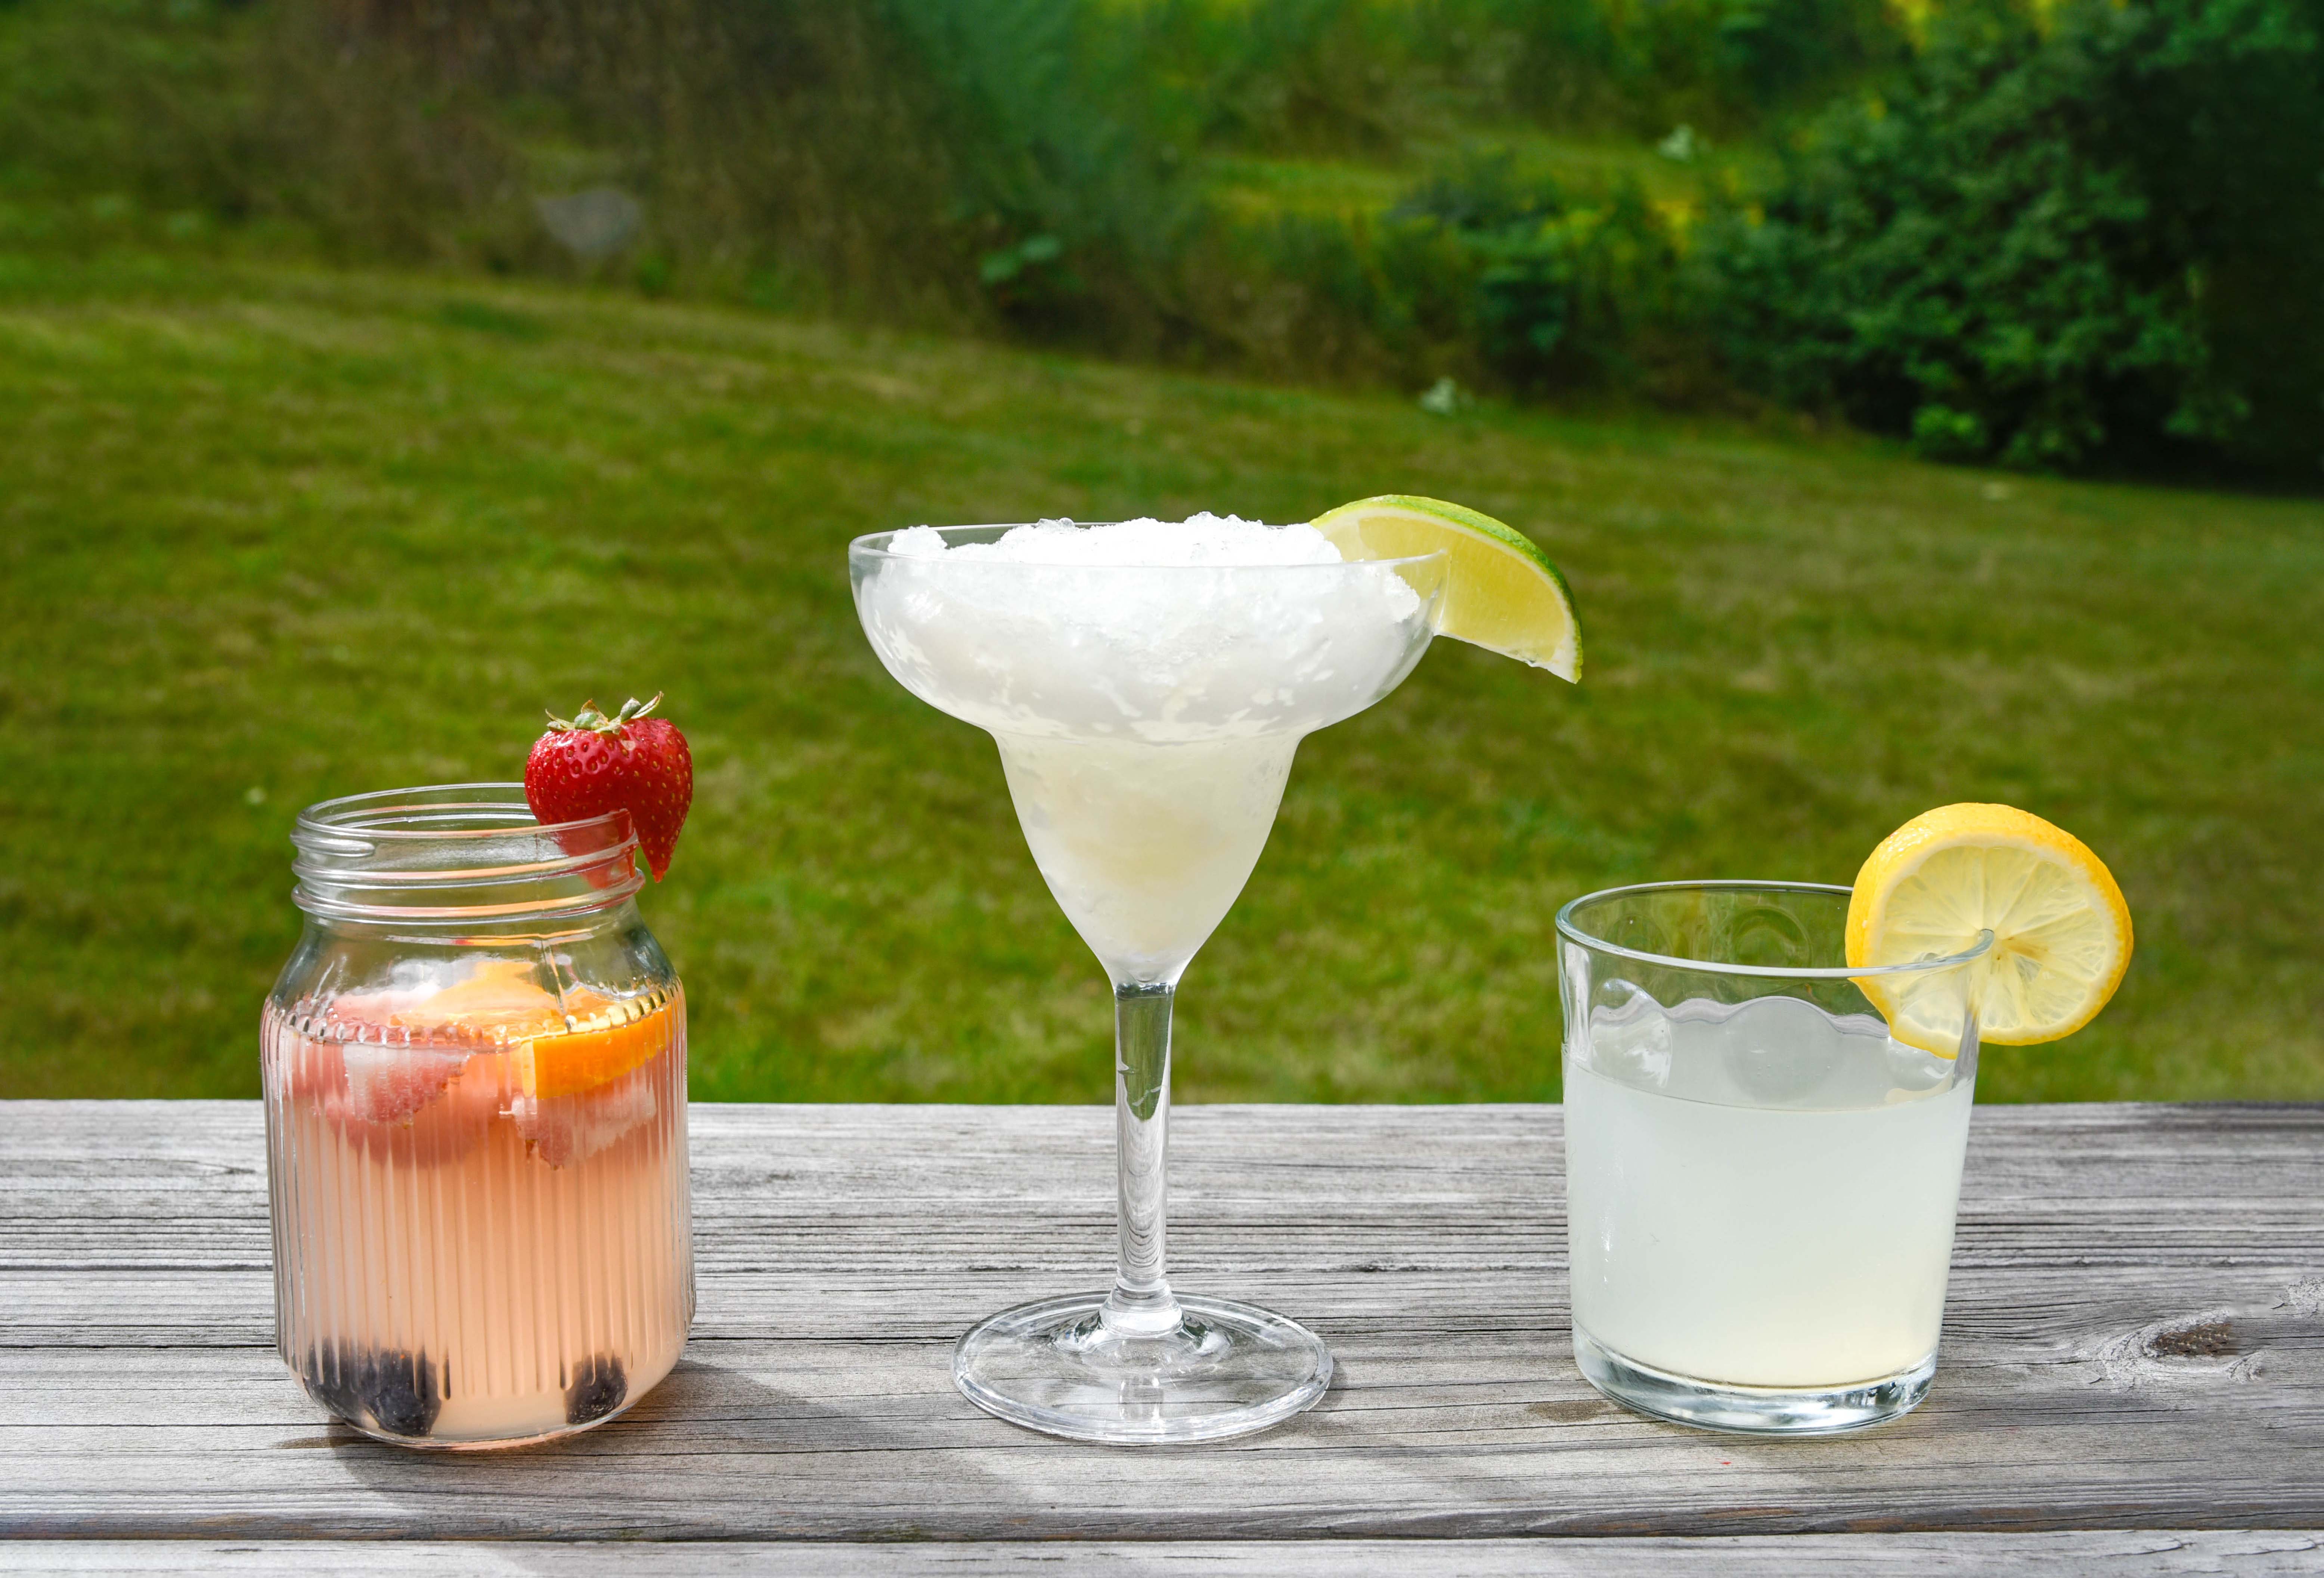 Camping Cocktails — three cocktails in a row, with margarita glass in the middle.